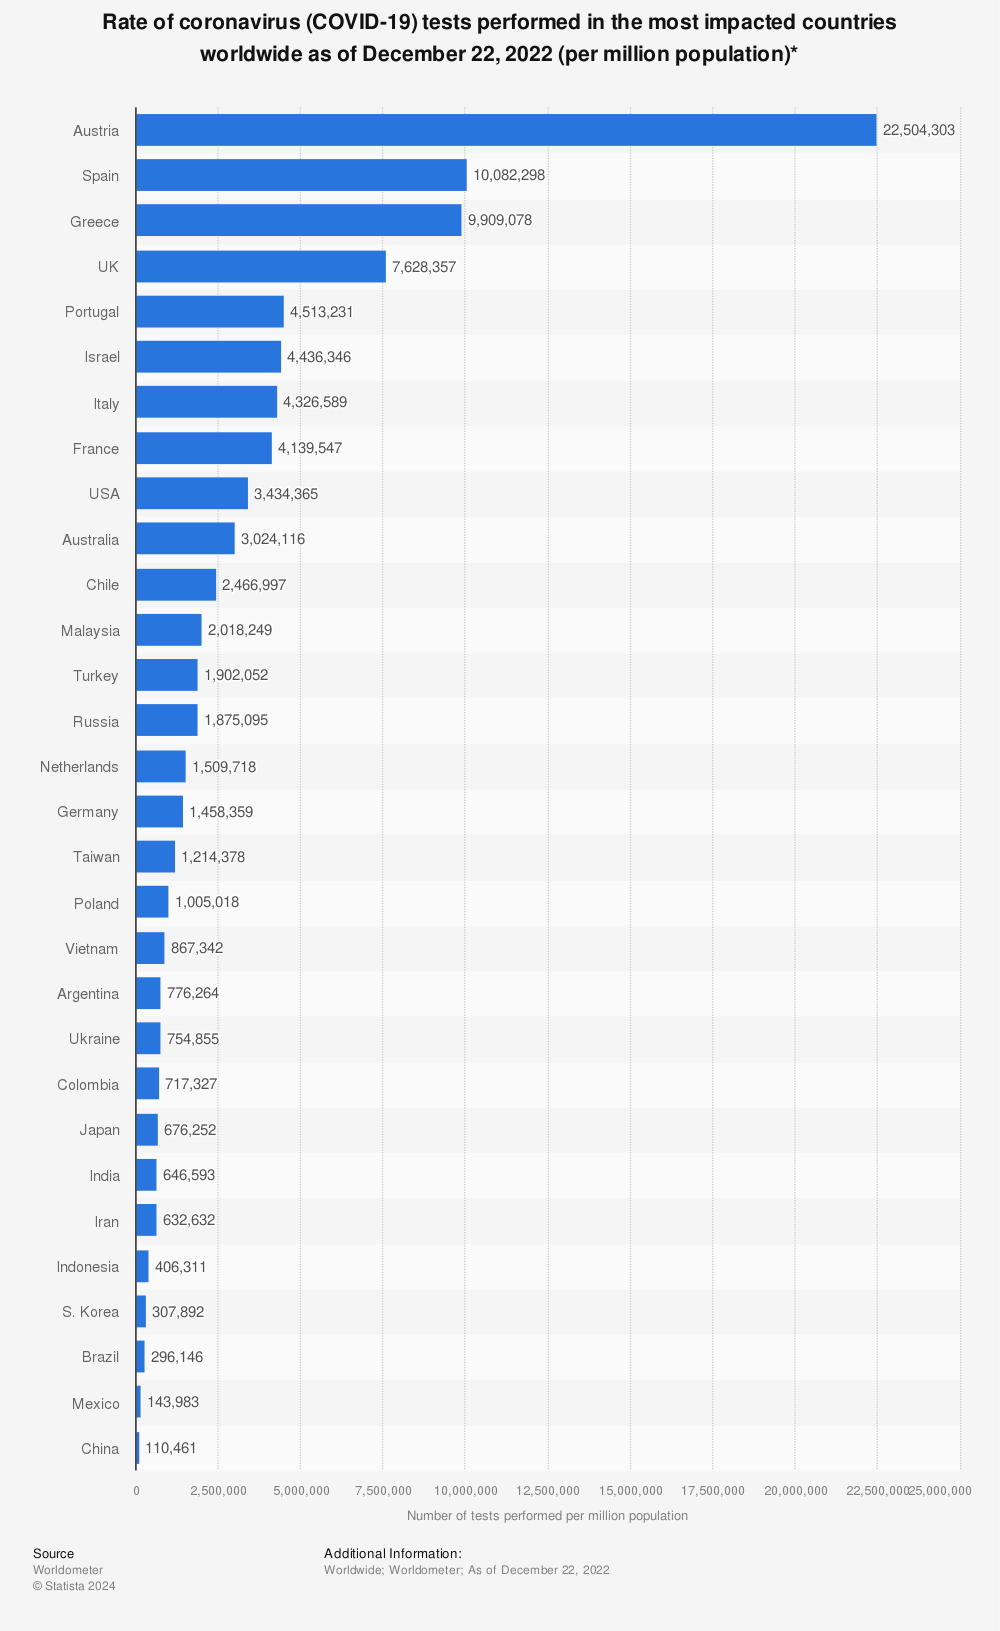 Statistic: Rate of coronavirus (COVID-19) tests performed in the most impacted countries worldwide as of May 17, 2022 (per million population)* | Statista